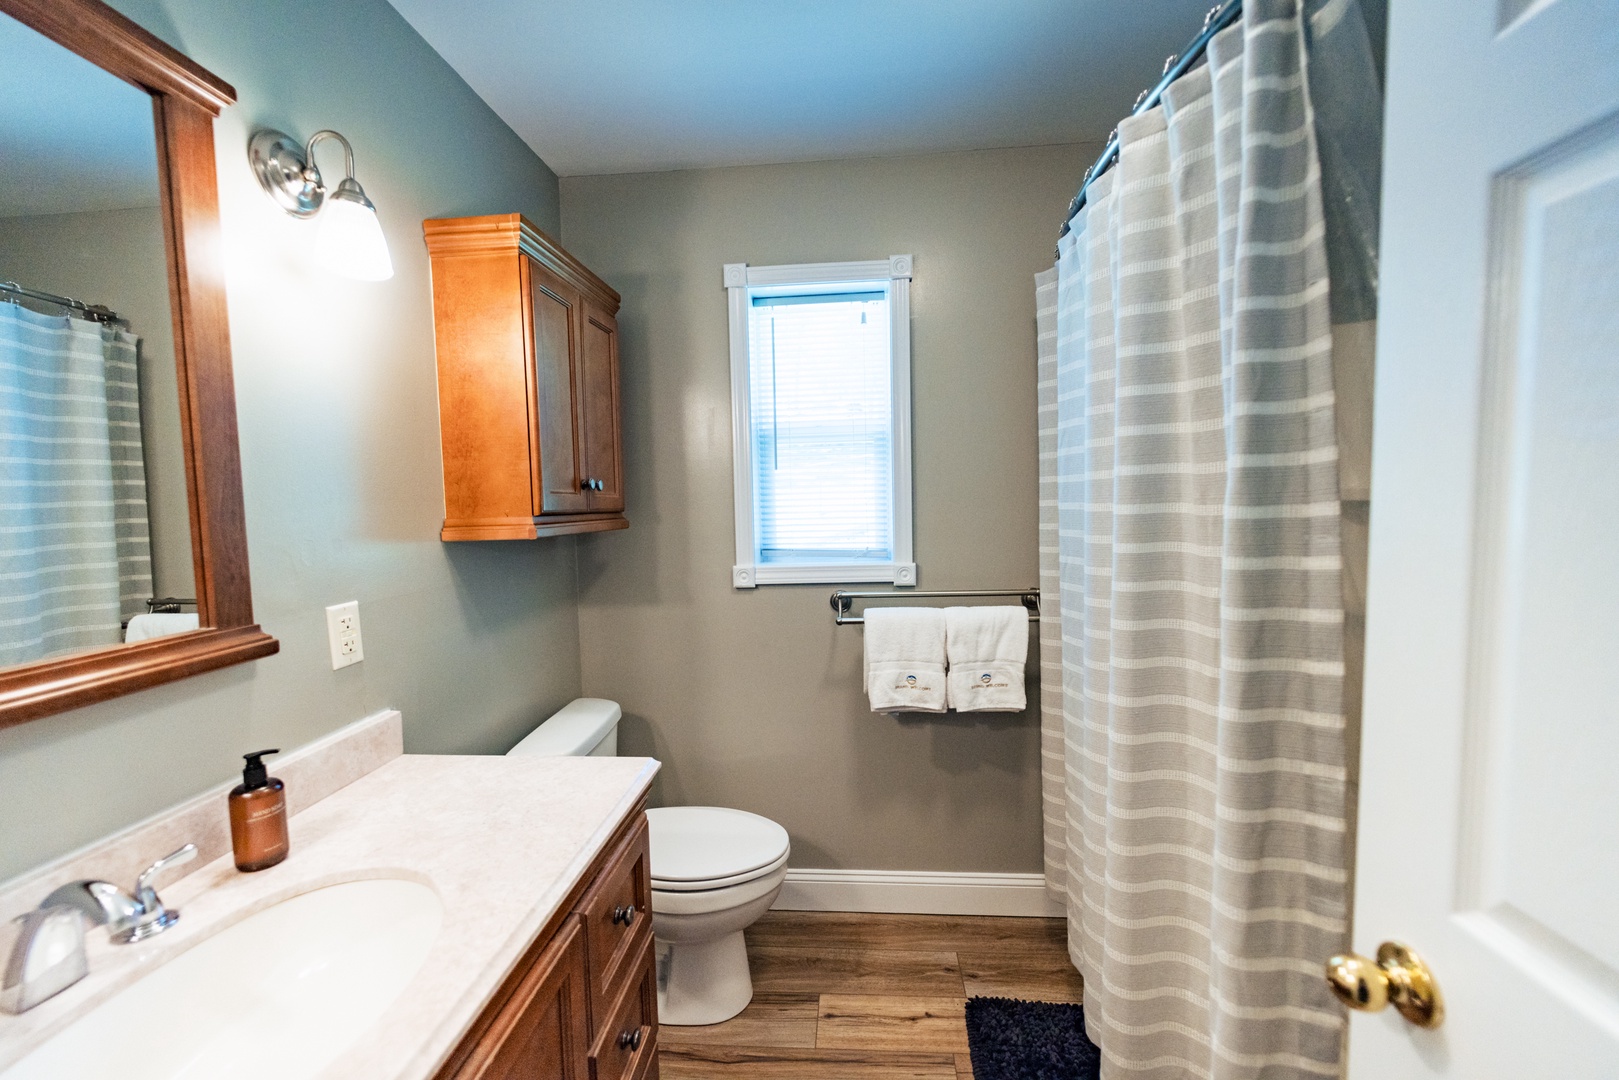 The 1st floor ensuite bath offers a single vanity & shower/tub combo